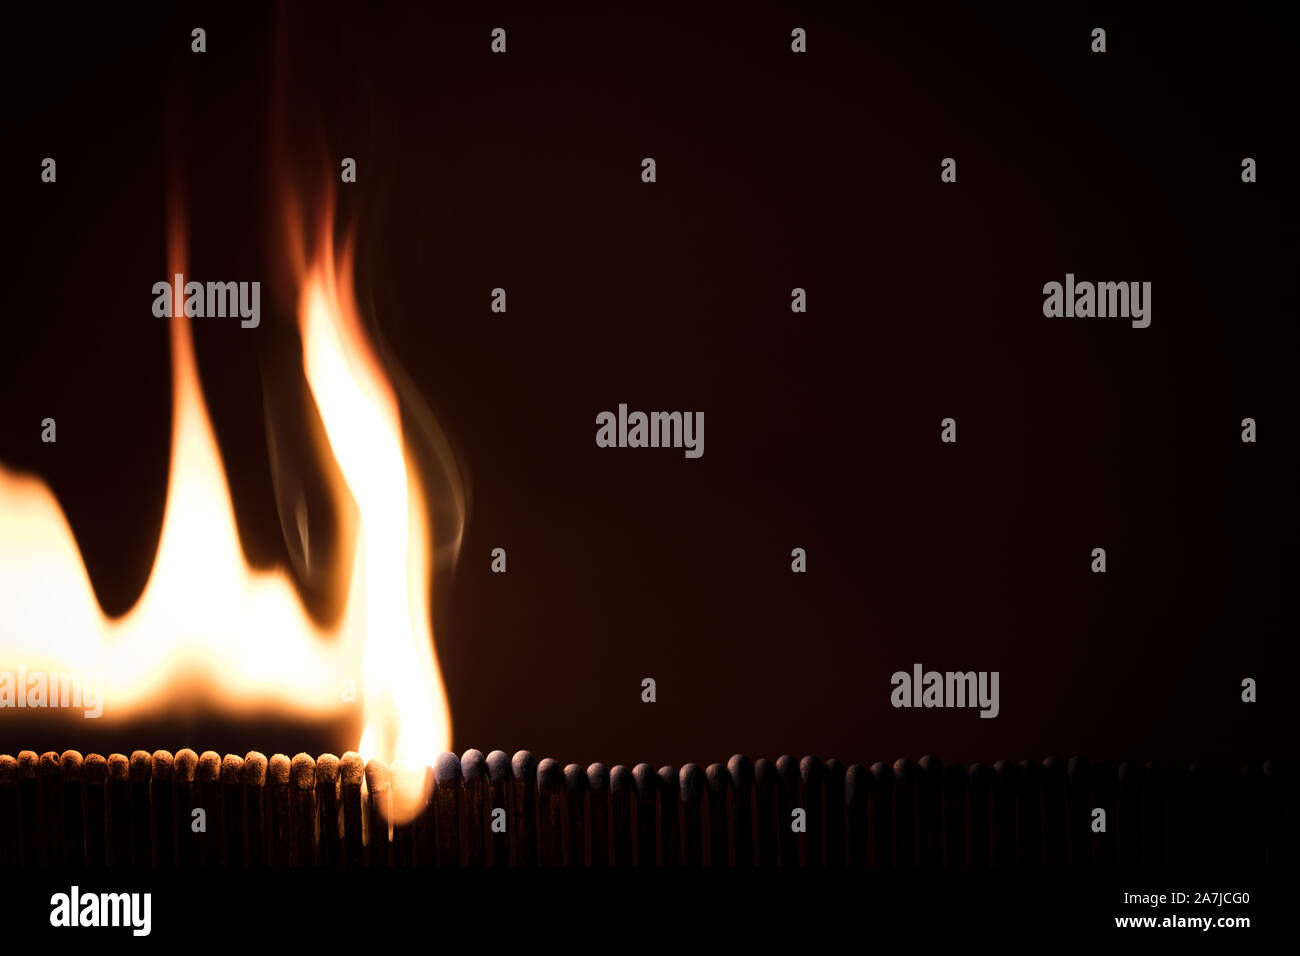 lots of matchsticks burning with a domino effect, fire with black background Stock Photo